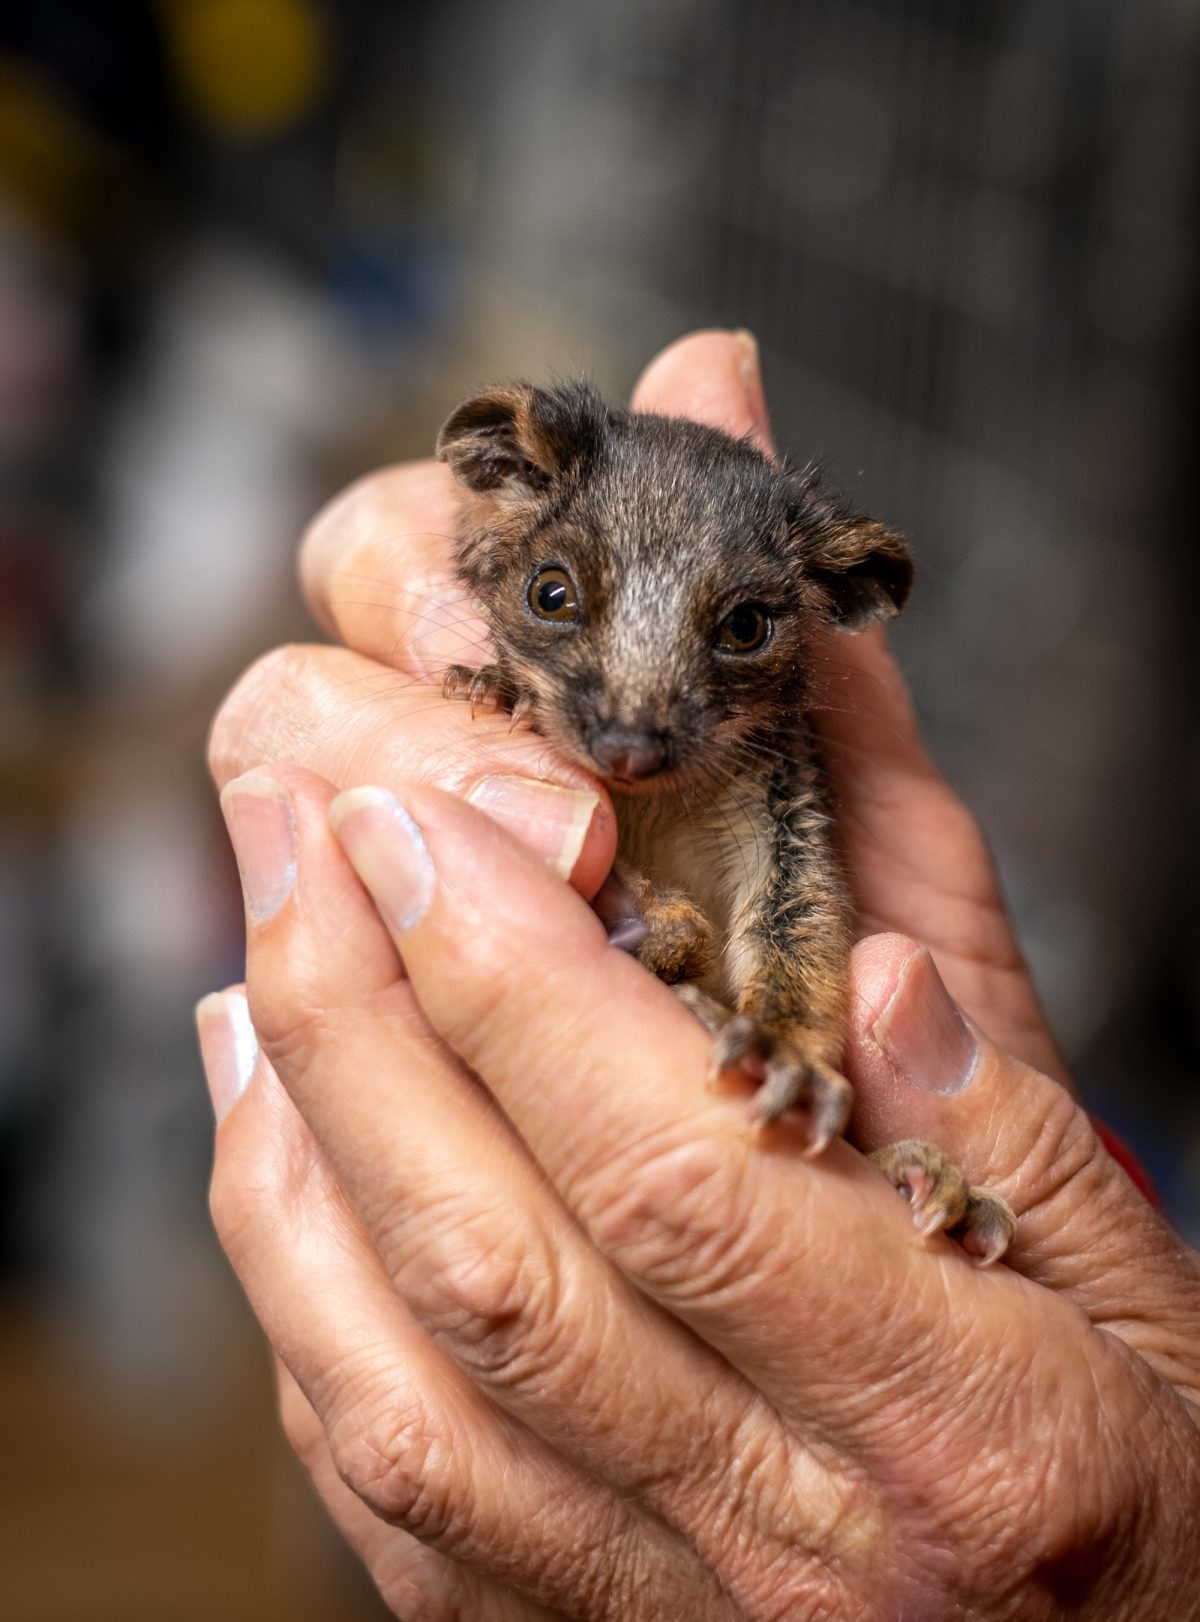 Cherry Gardens animal rescue centre Minton Farm is restoring native wildlife back to health and home in the Onkaparinga region and beyond.